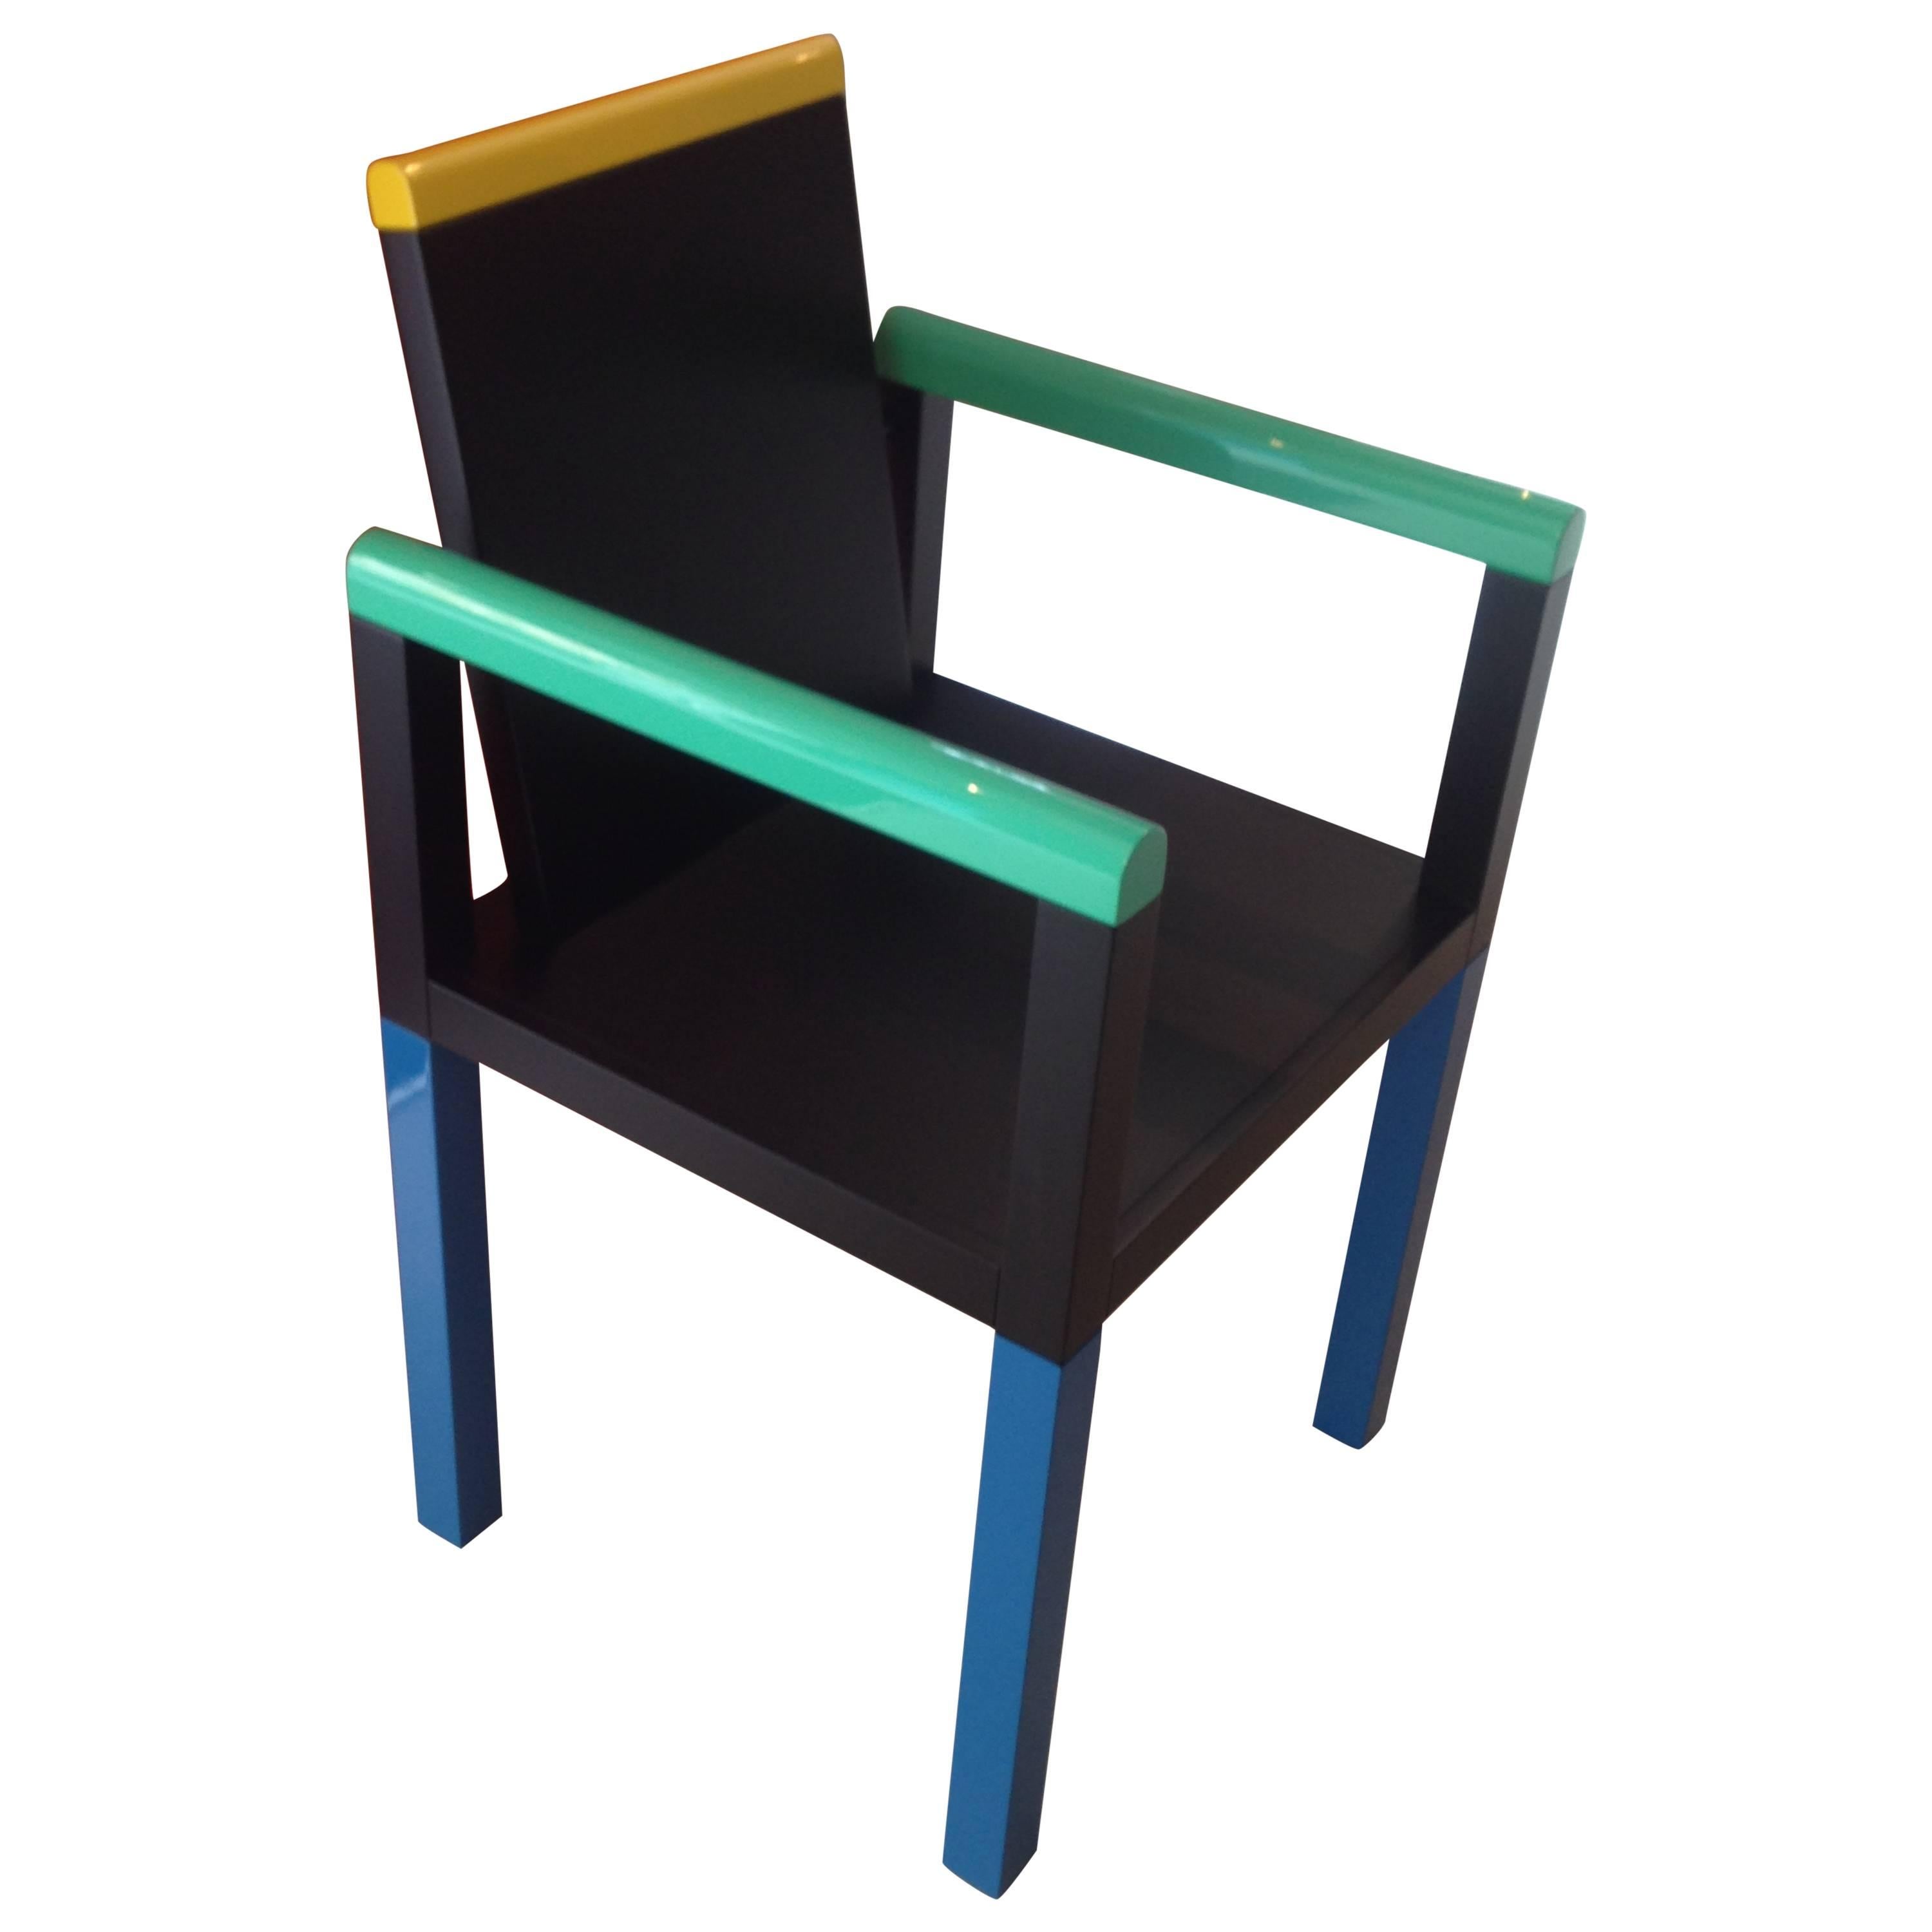 "Palace" Chair by George Sowden